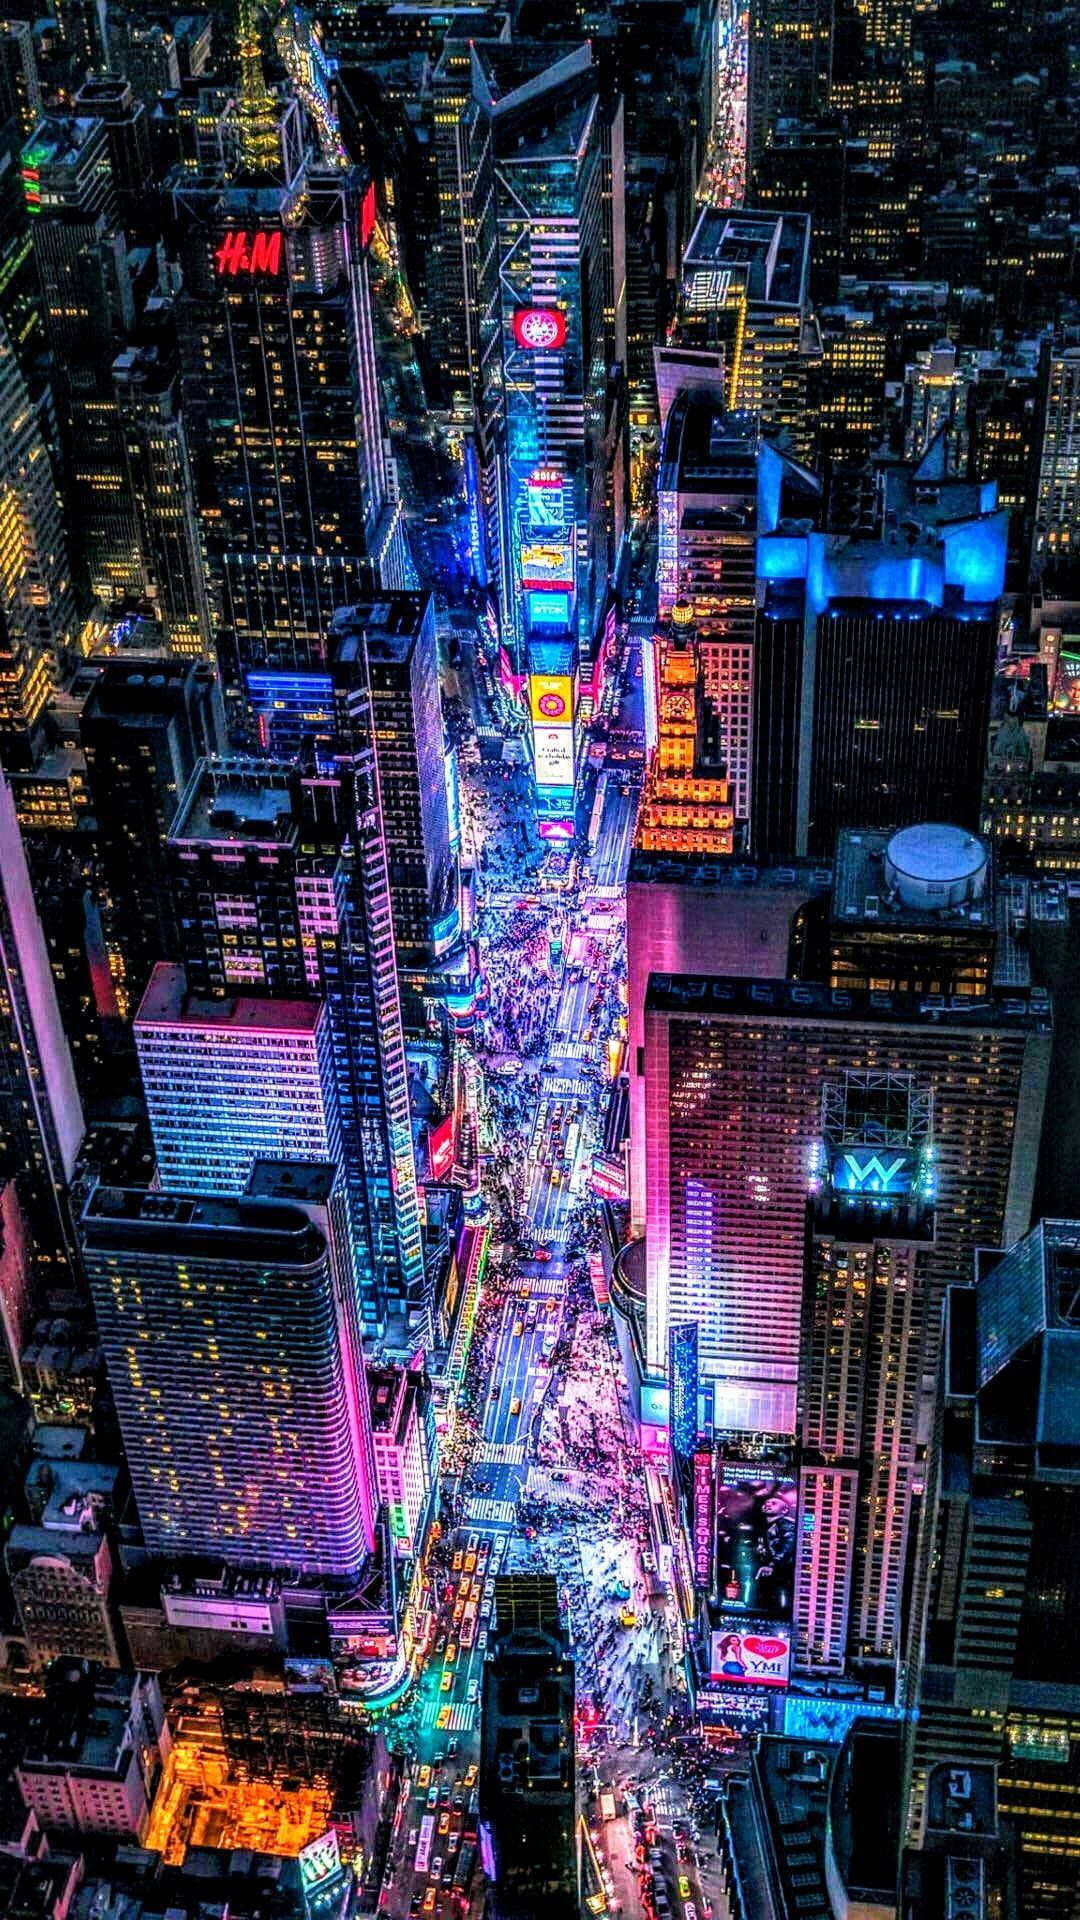 IPhone wallpaper of Times Square in New York City at night, taken from a high angle looking down on the neon lights and crowds. - Cyberpunk, Cyberpunk 2077